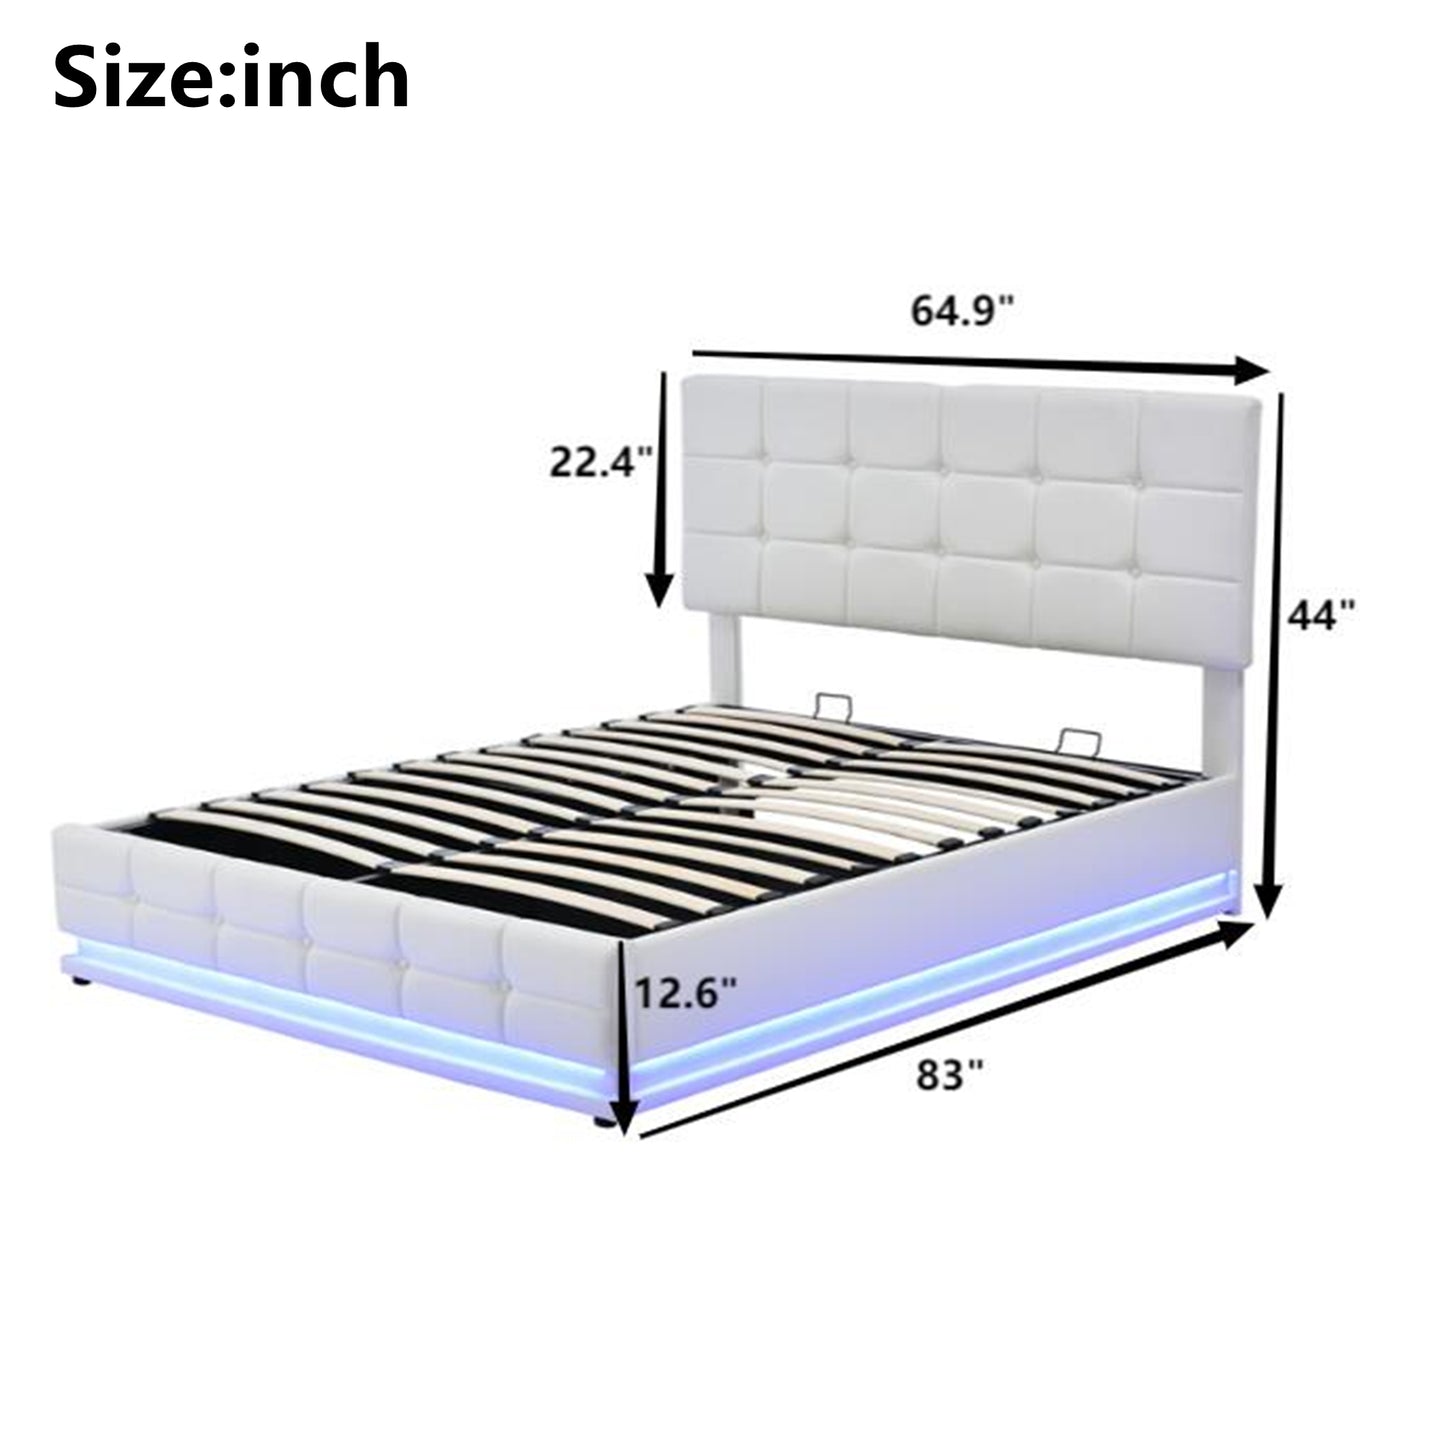 Mabin Modern Hydraulic Lift Platform Bed with LED Lights - White